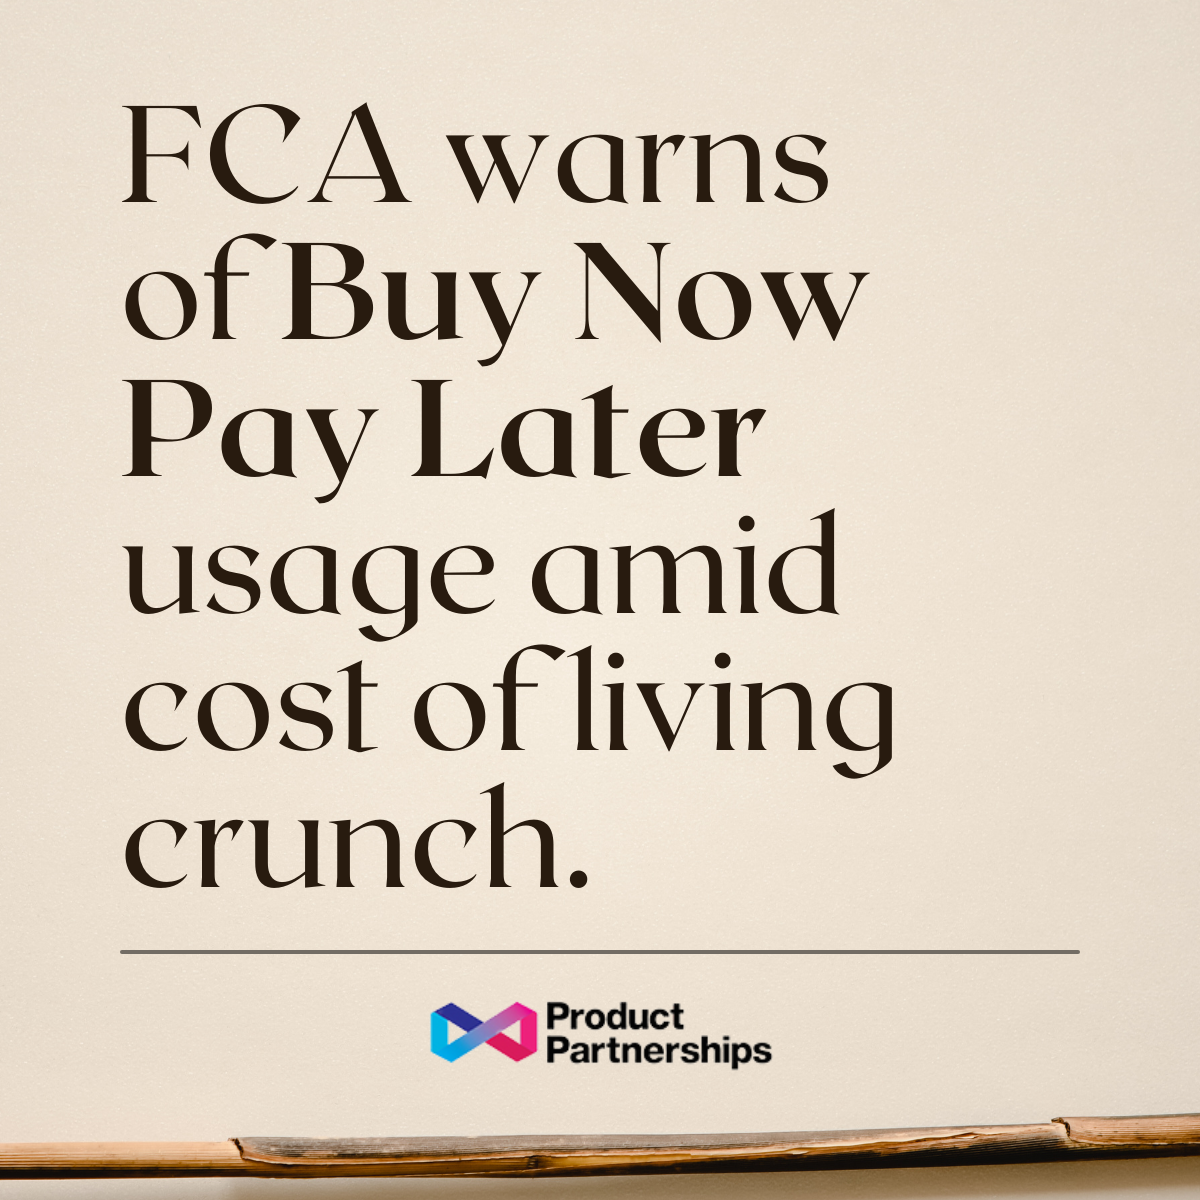 FCA warns of buy now pay later usage amid cost of living crunch